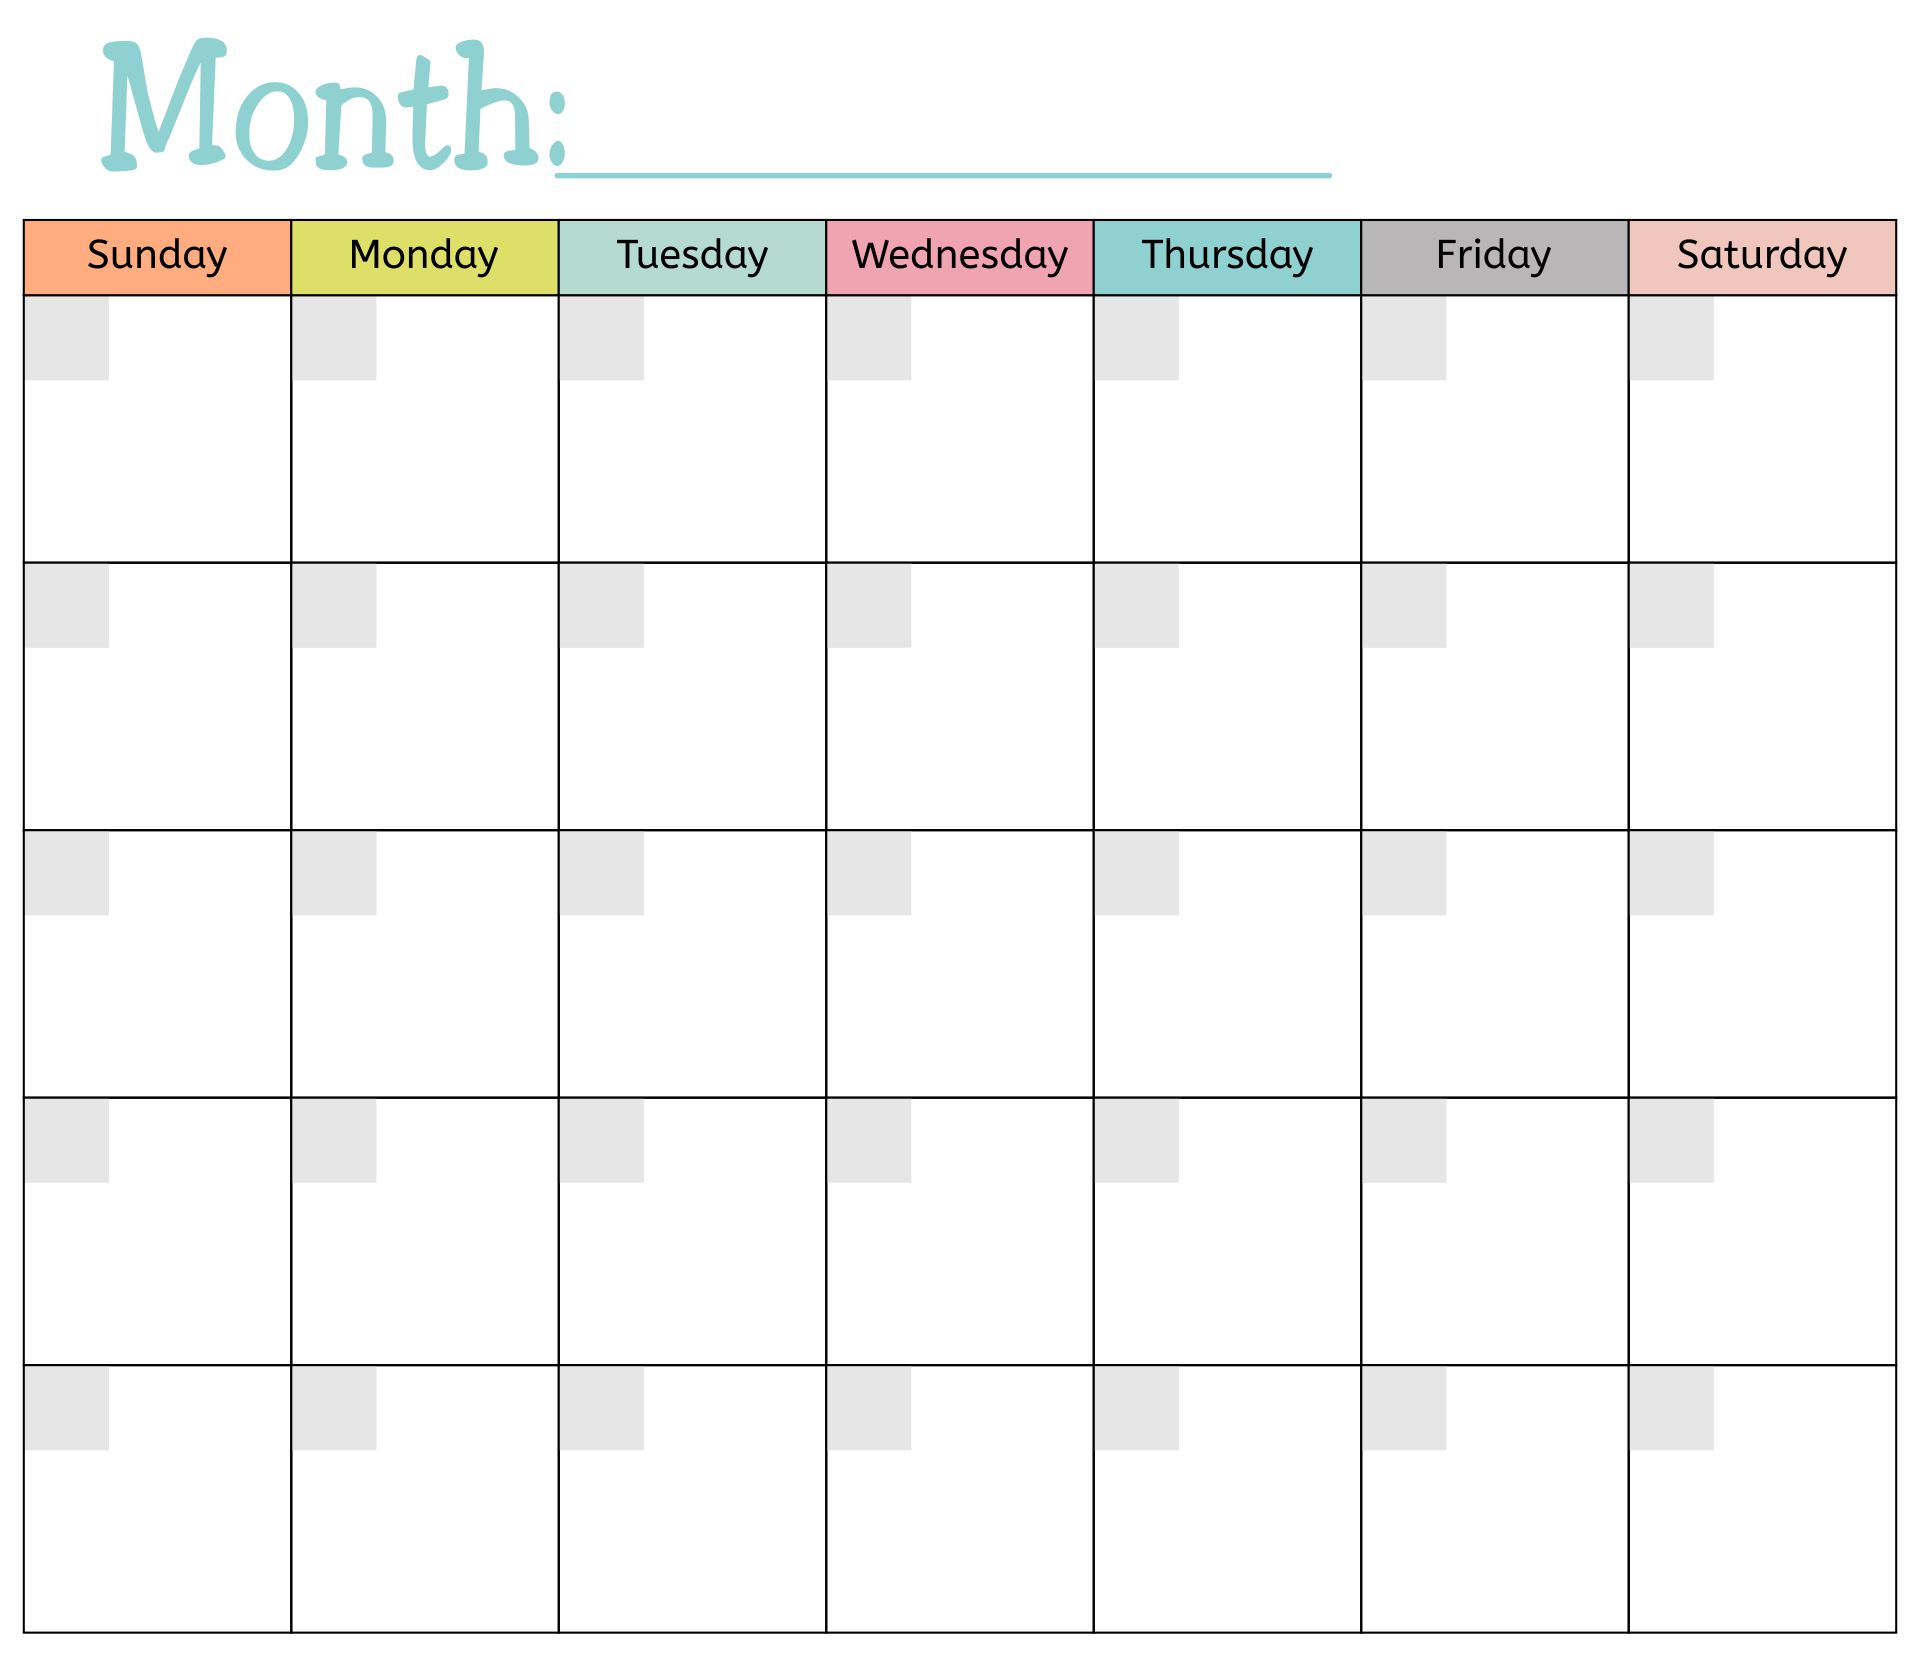 free-printable-monthly-schedule-template-two-cute-designs-download-printable-blank-monthly